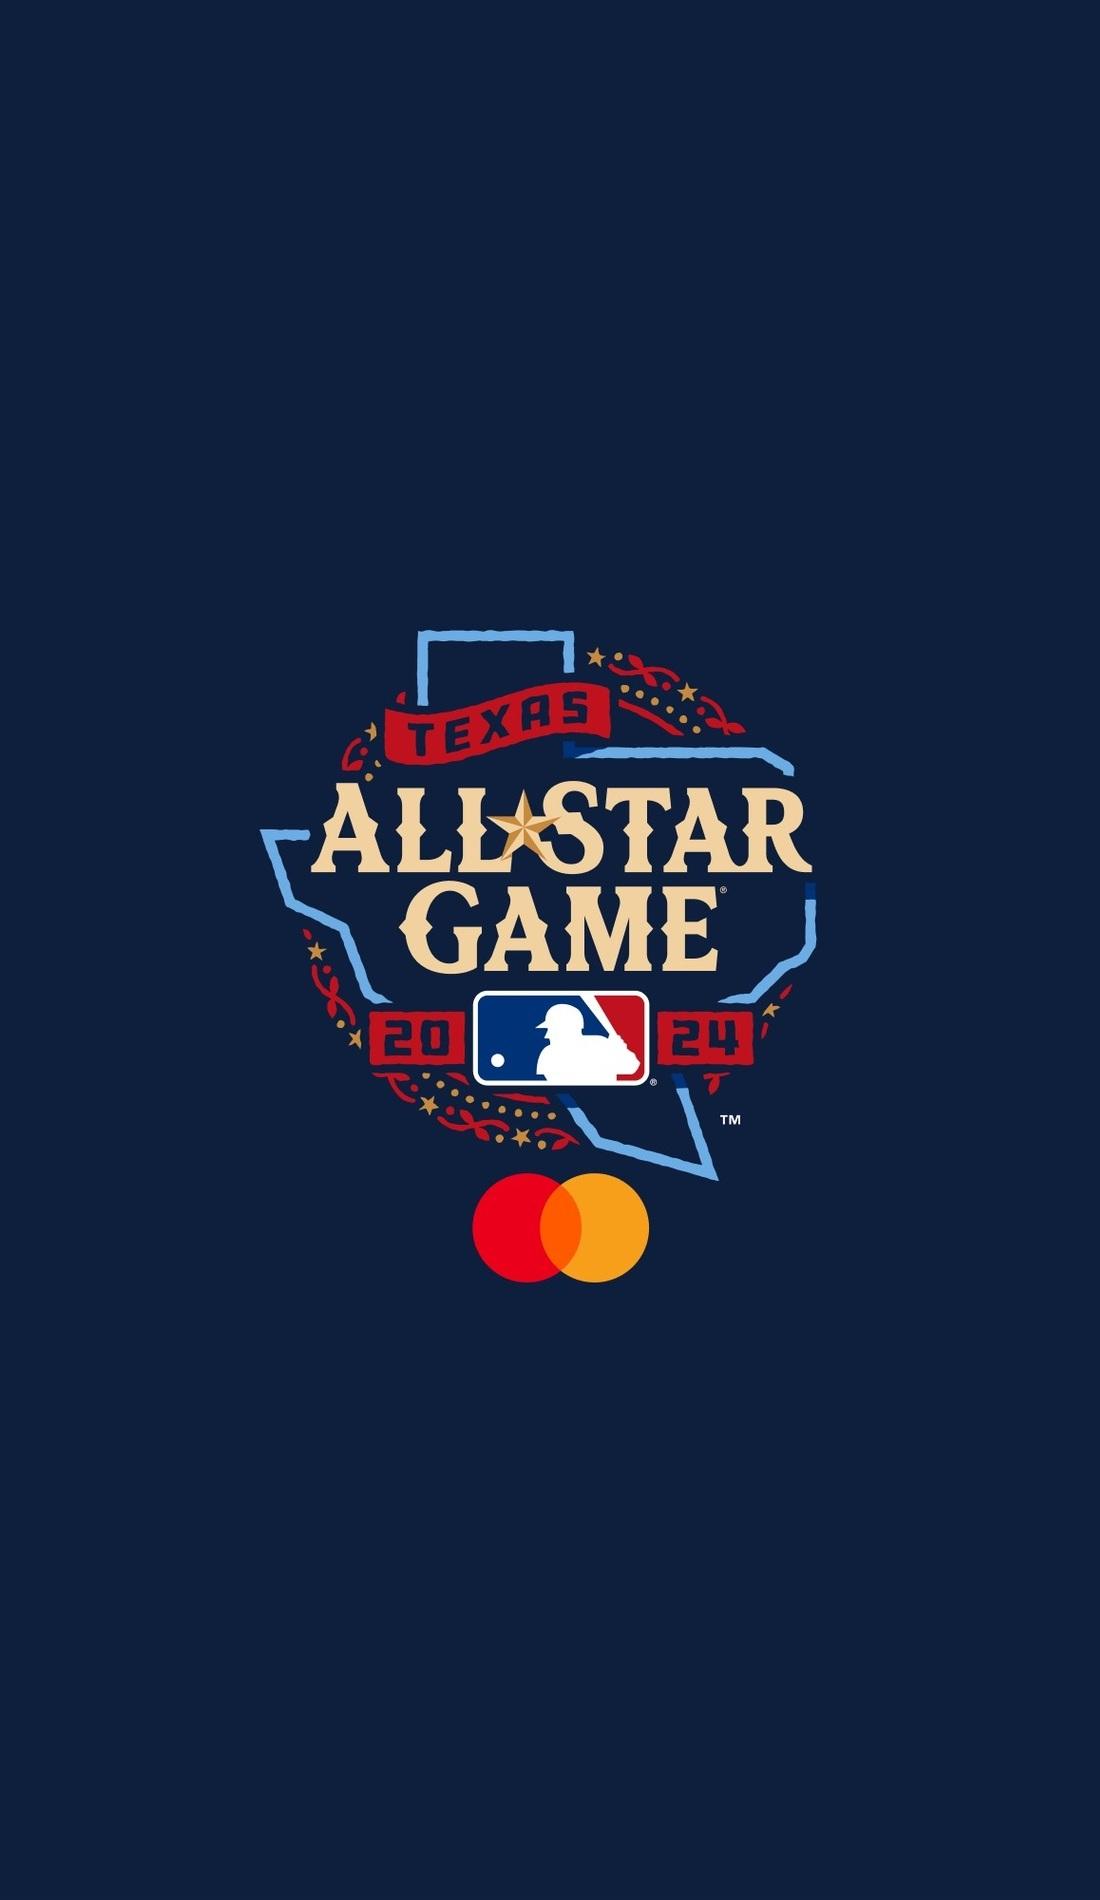 Check out Minnesota's logo for the 2014 MLB All-Star Game